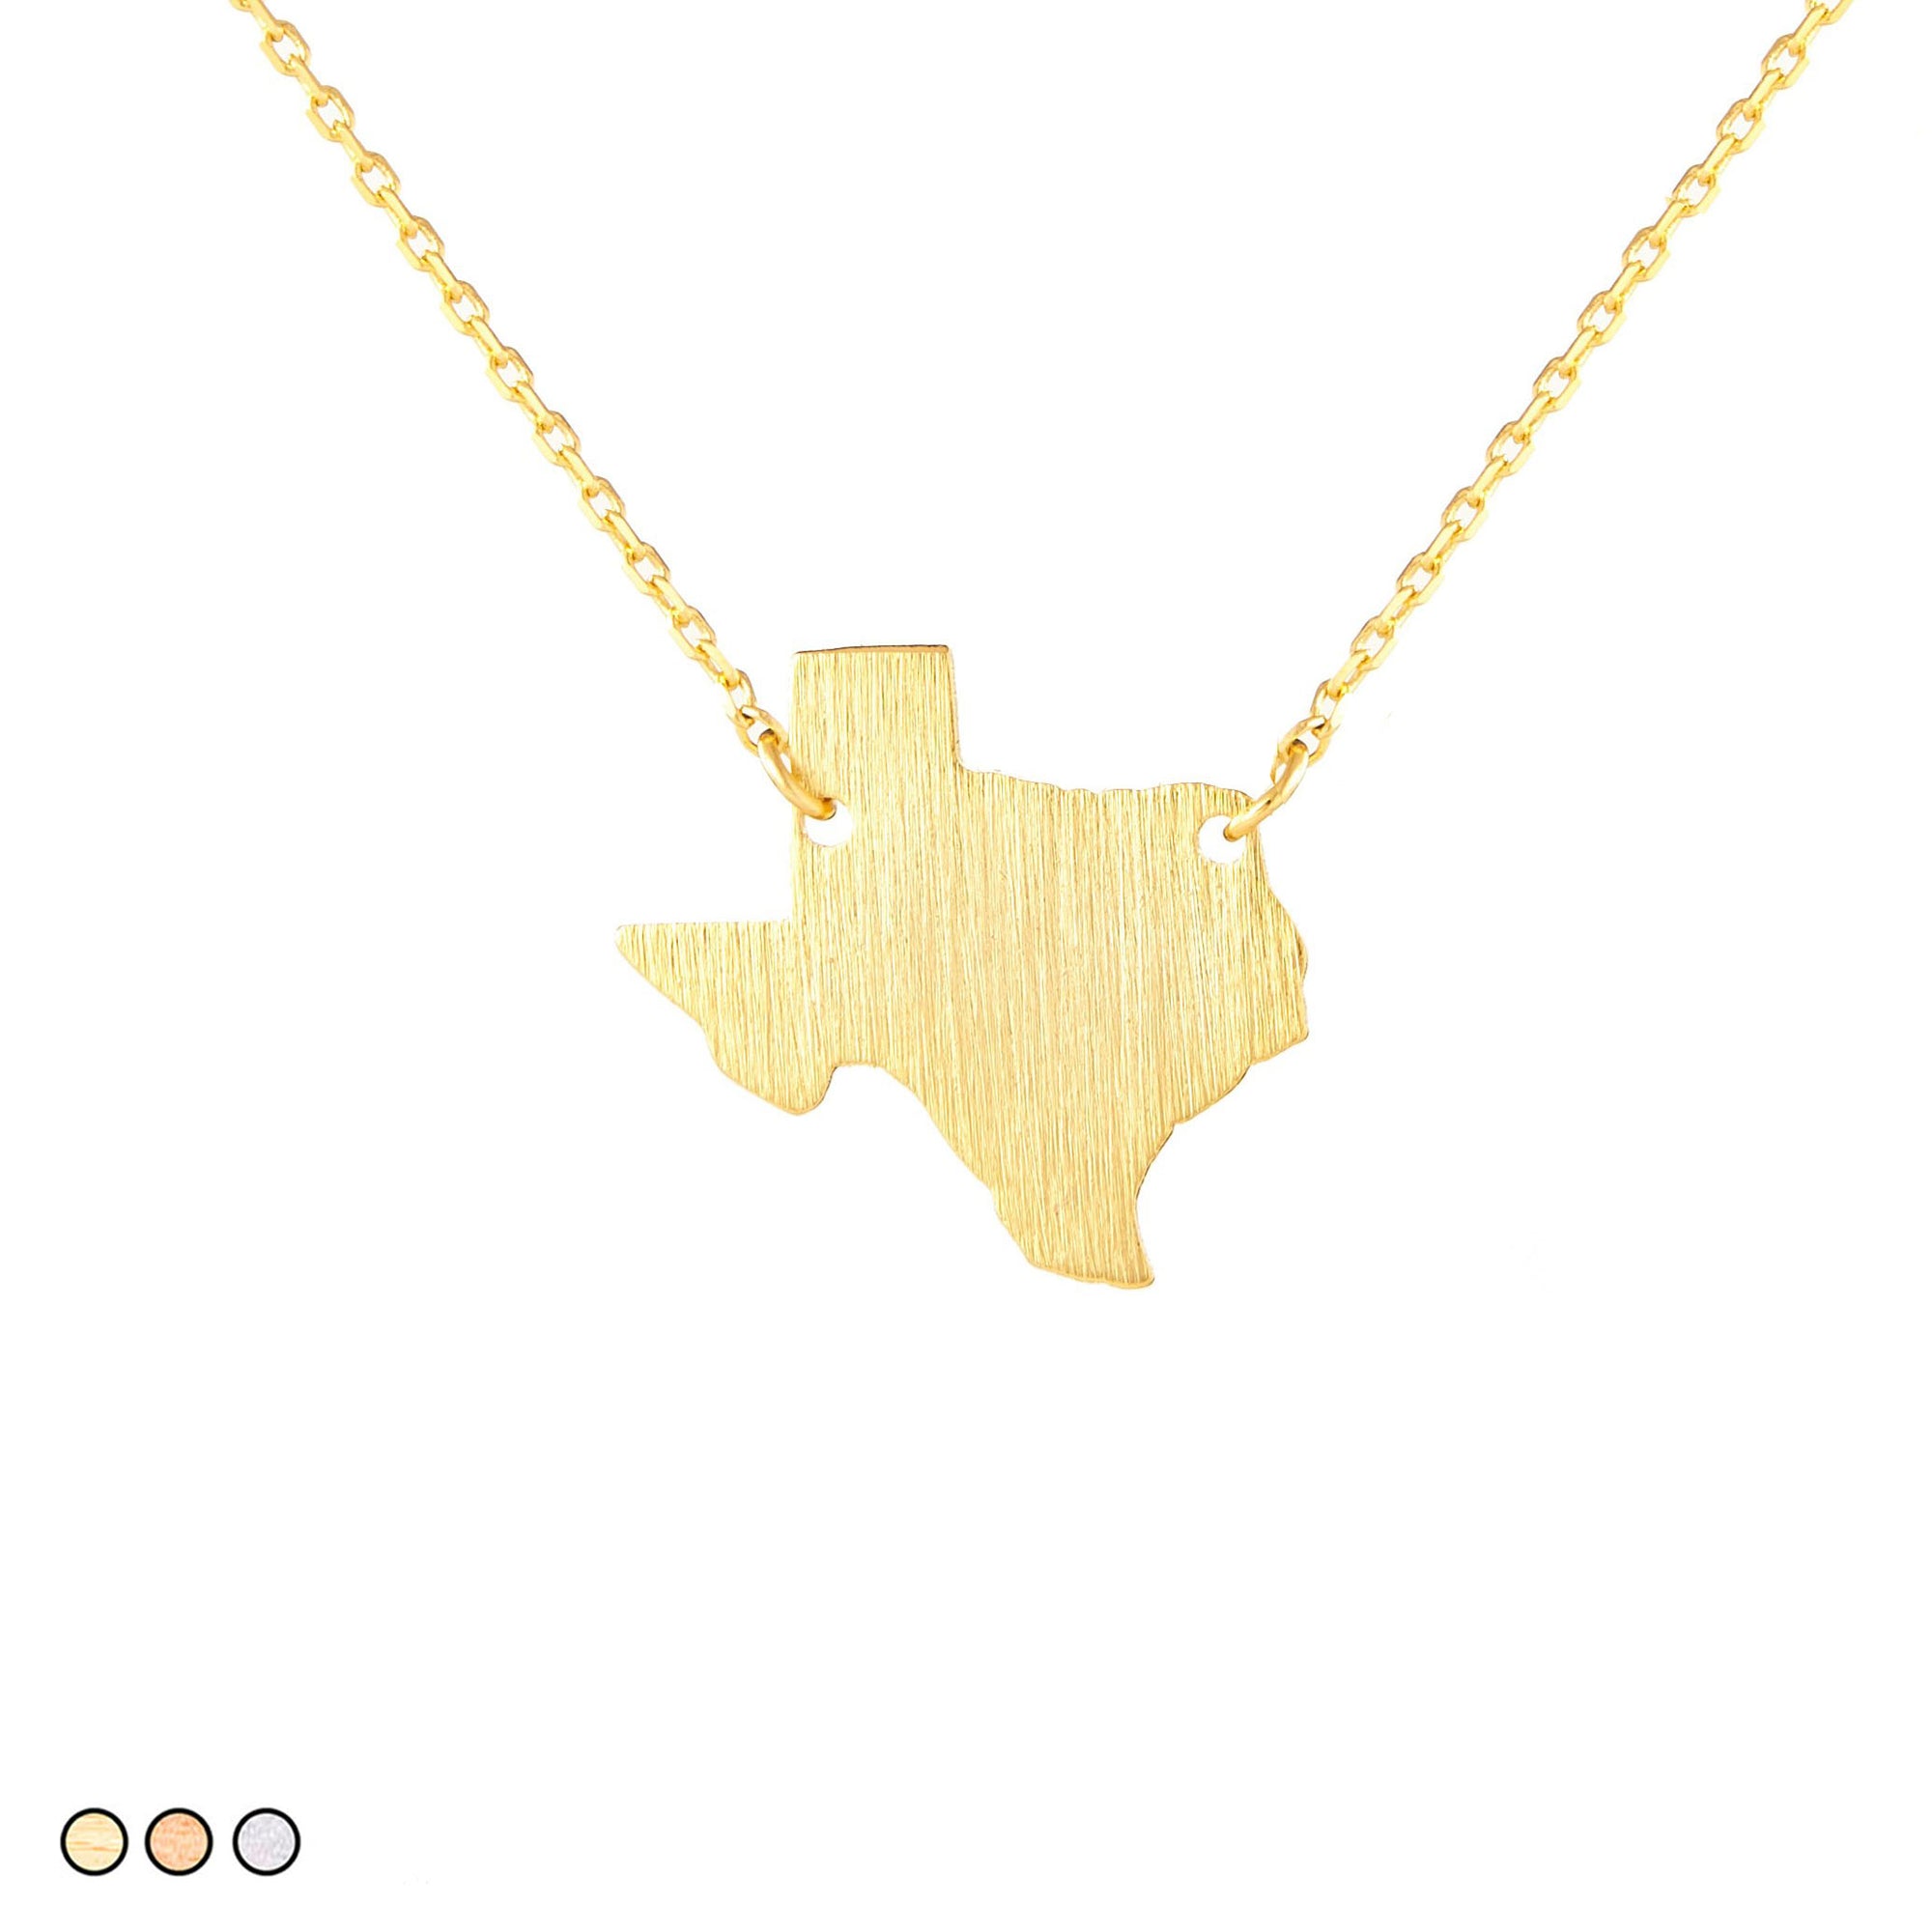 Texas State Plate Minimalist Festoon Necklace (Gold, Rose Gold, Silver)